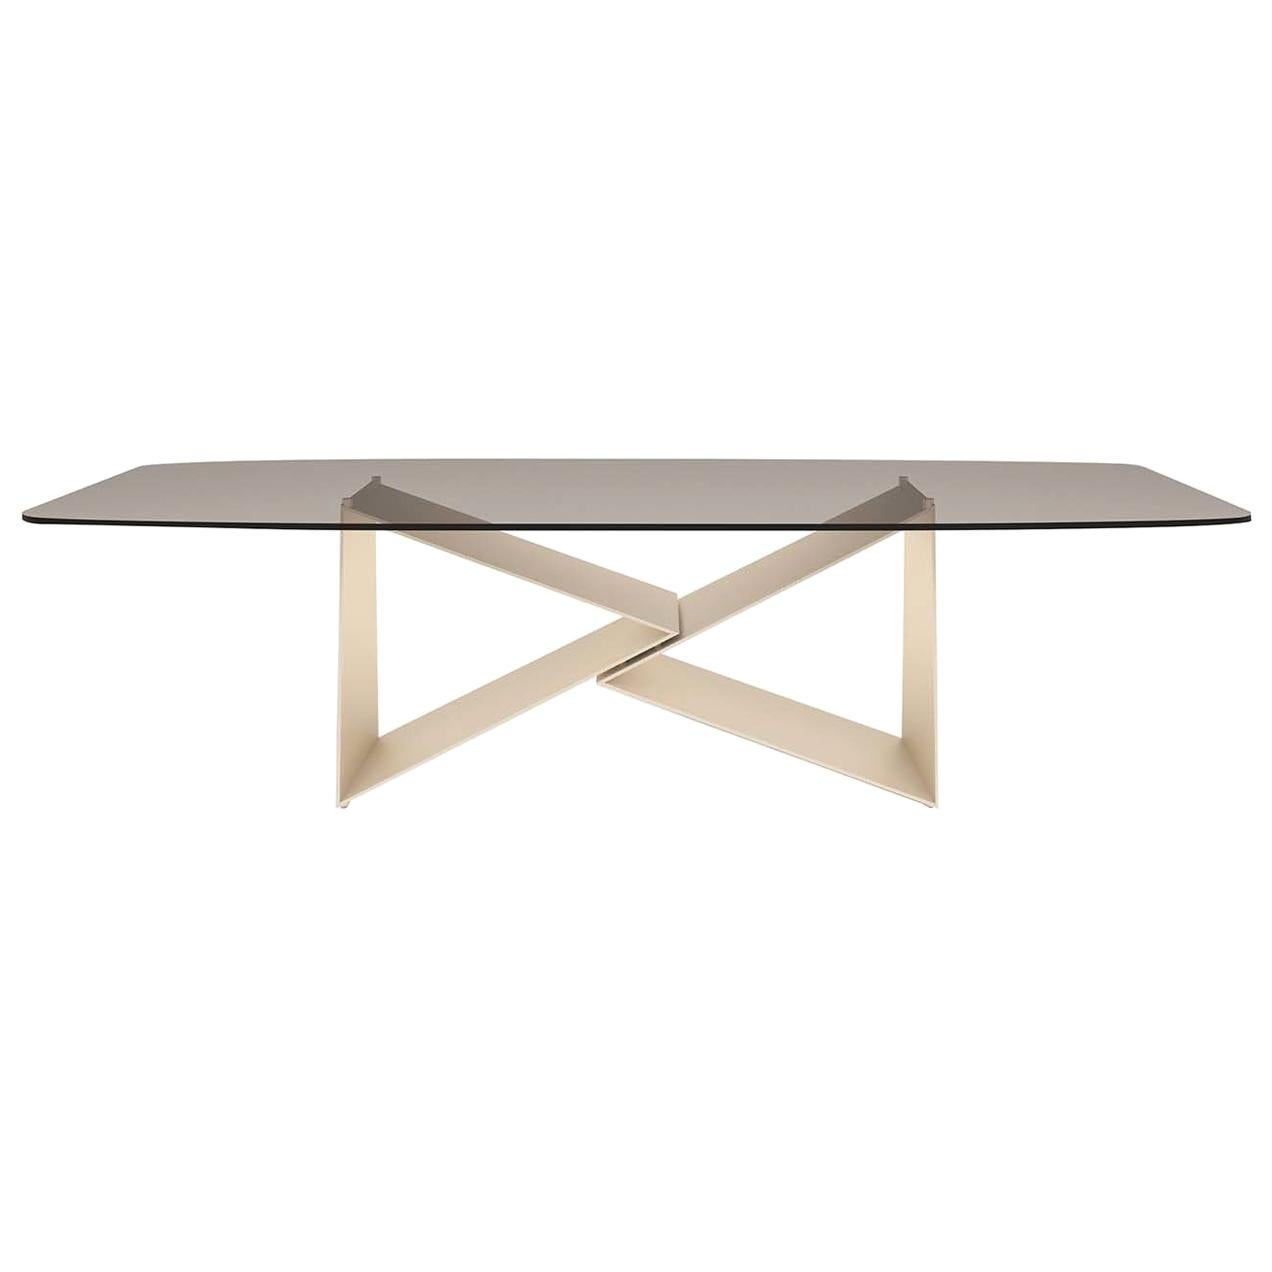 Eiger Table by Andrea Lucatello